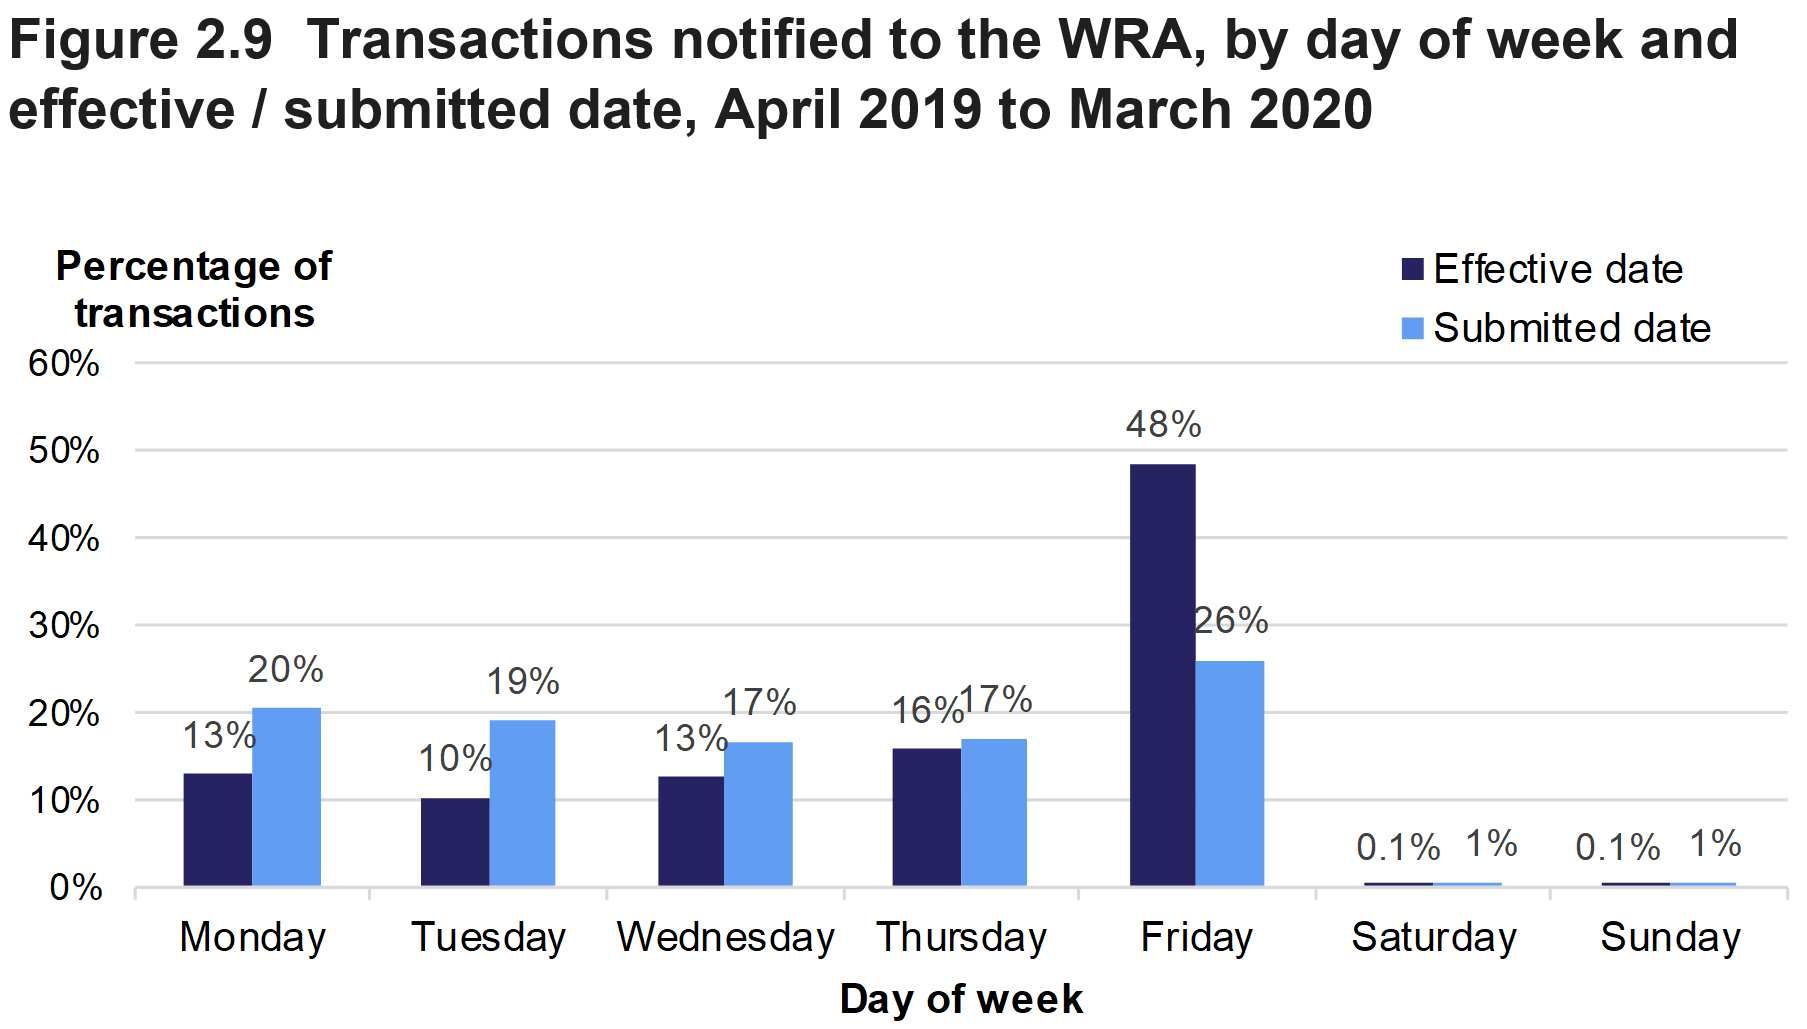 Figure 2.9 shows the percentage of transactions which became effective and which were submitted on the different days of the week. The data relates to transactions which were effective in April 2019 to March 2020, and transactions submitted to the WRA between April 2019 and March 2020.